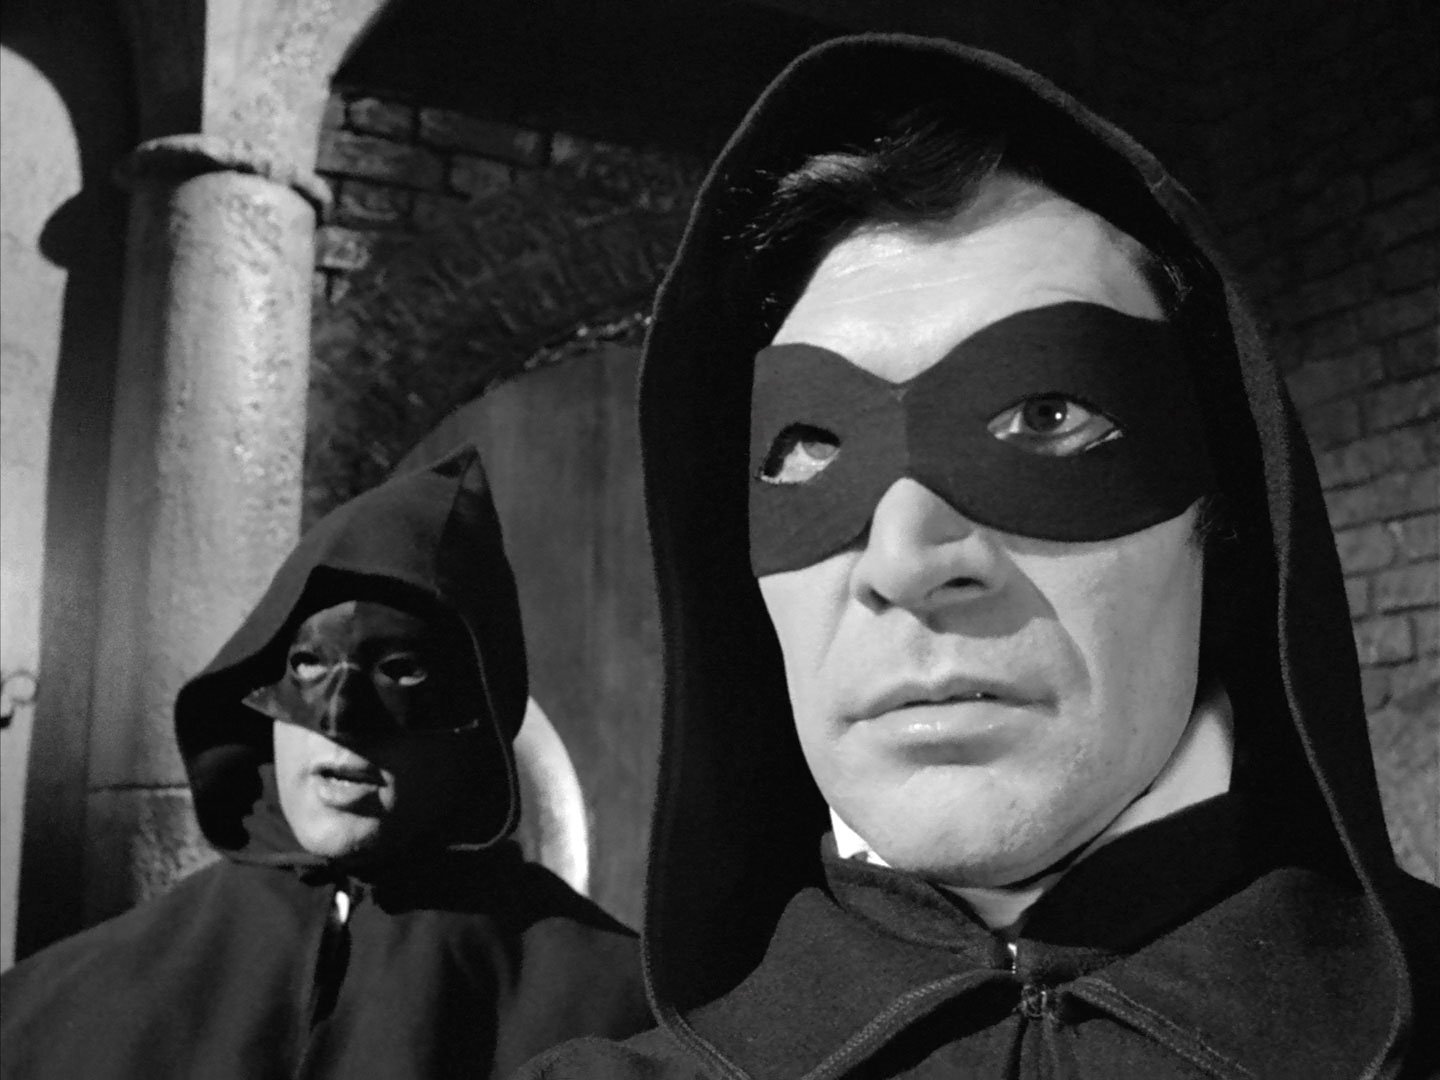 Peter Wyngarde (right) in mask and hood